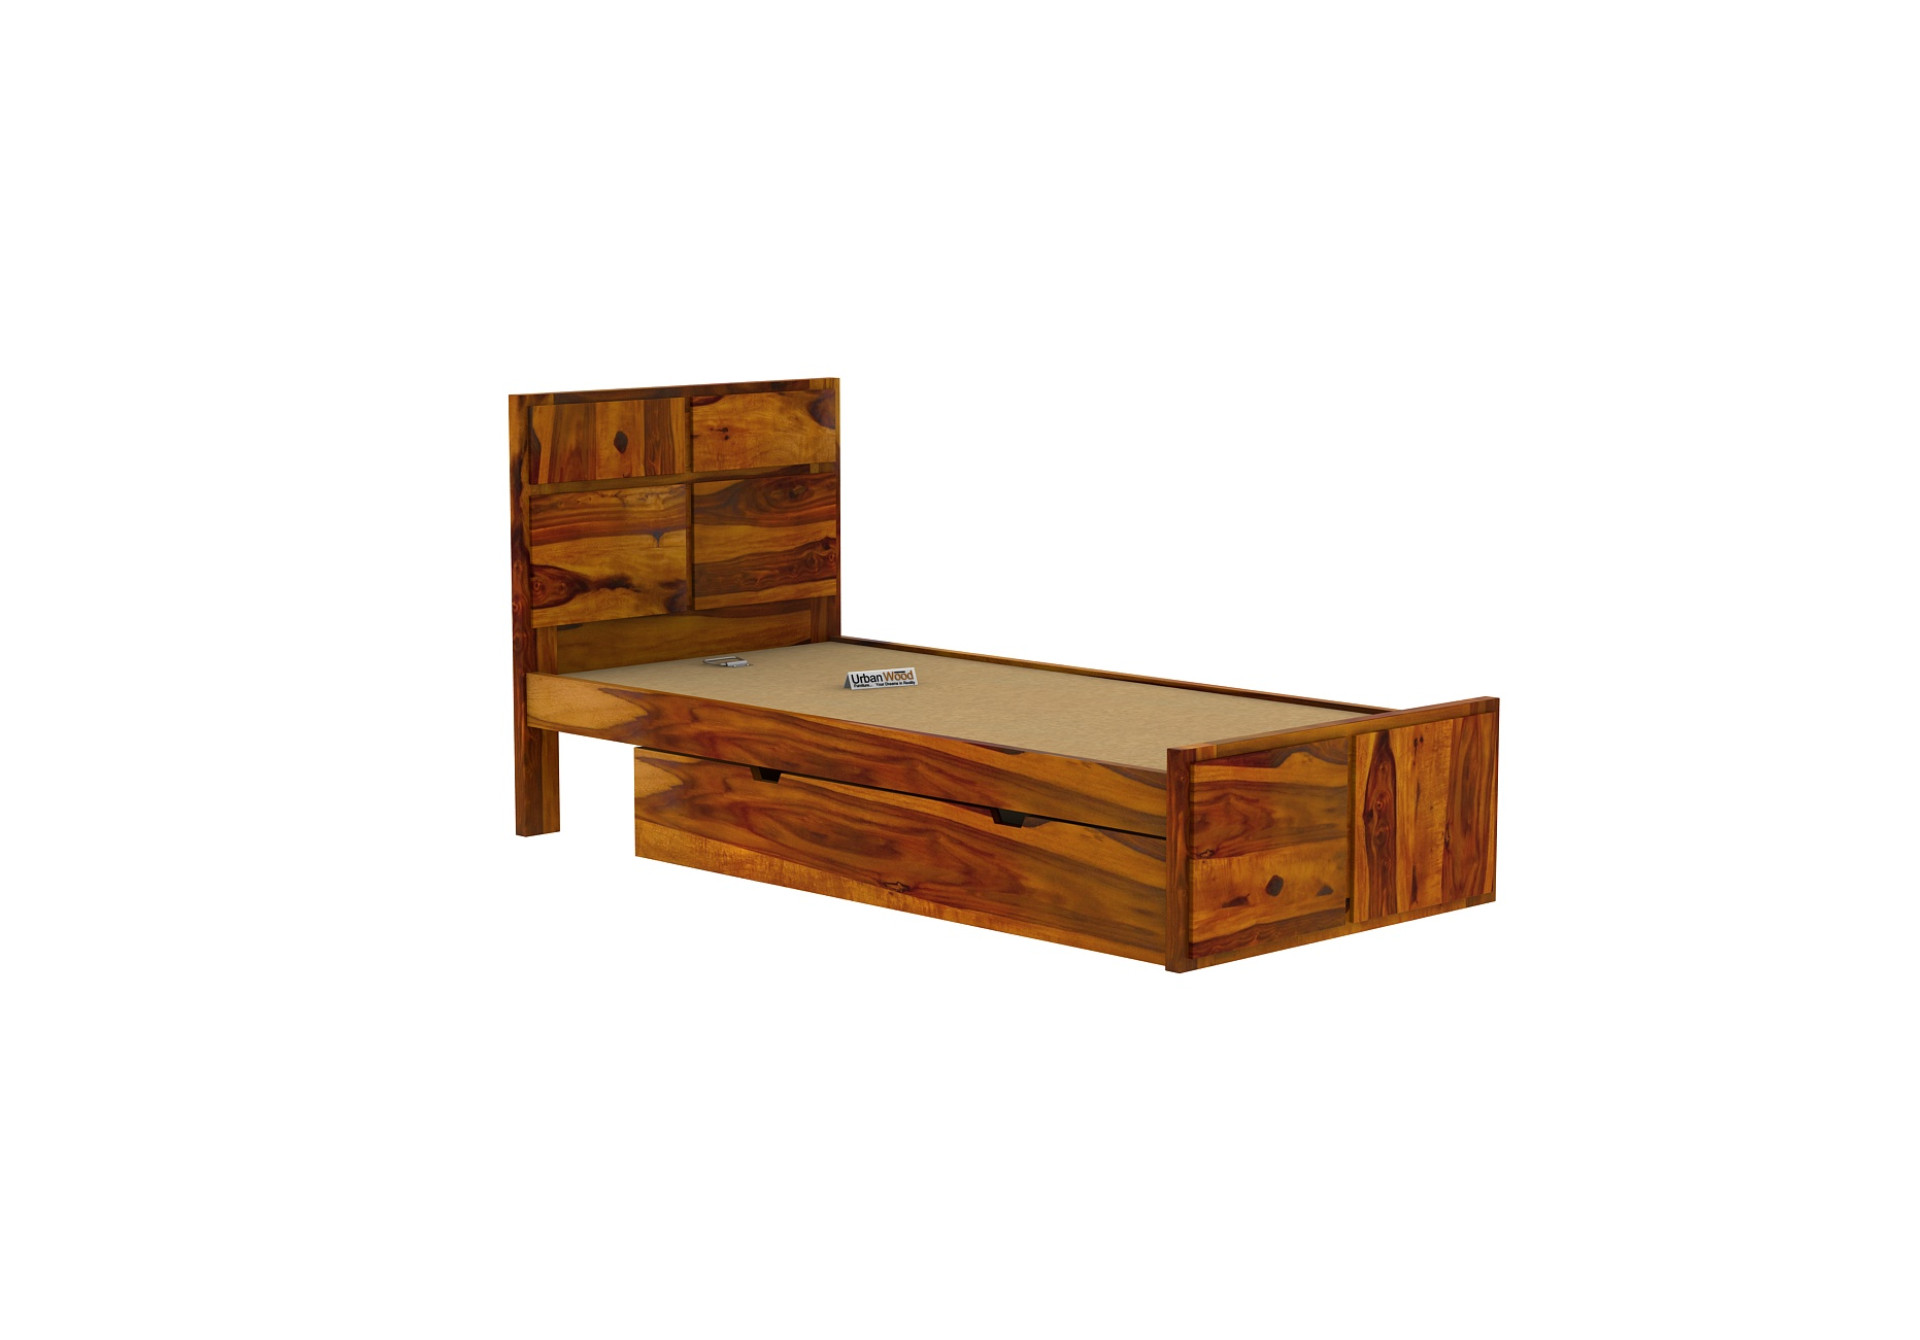 Bedswind Single Bed With Drawer Storage ( Honey Finish )